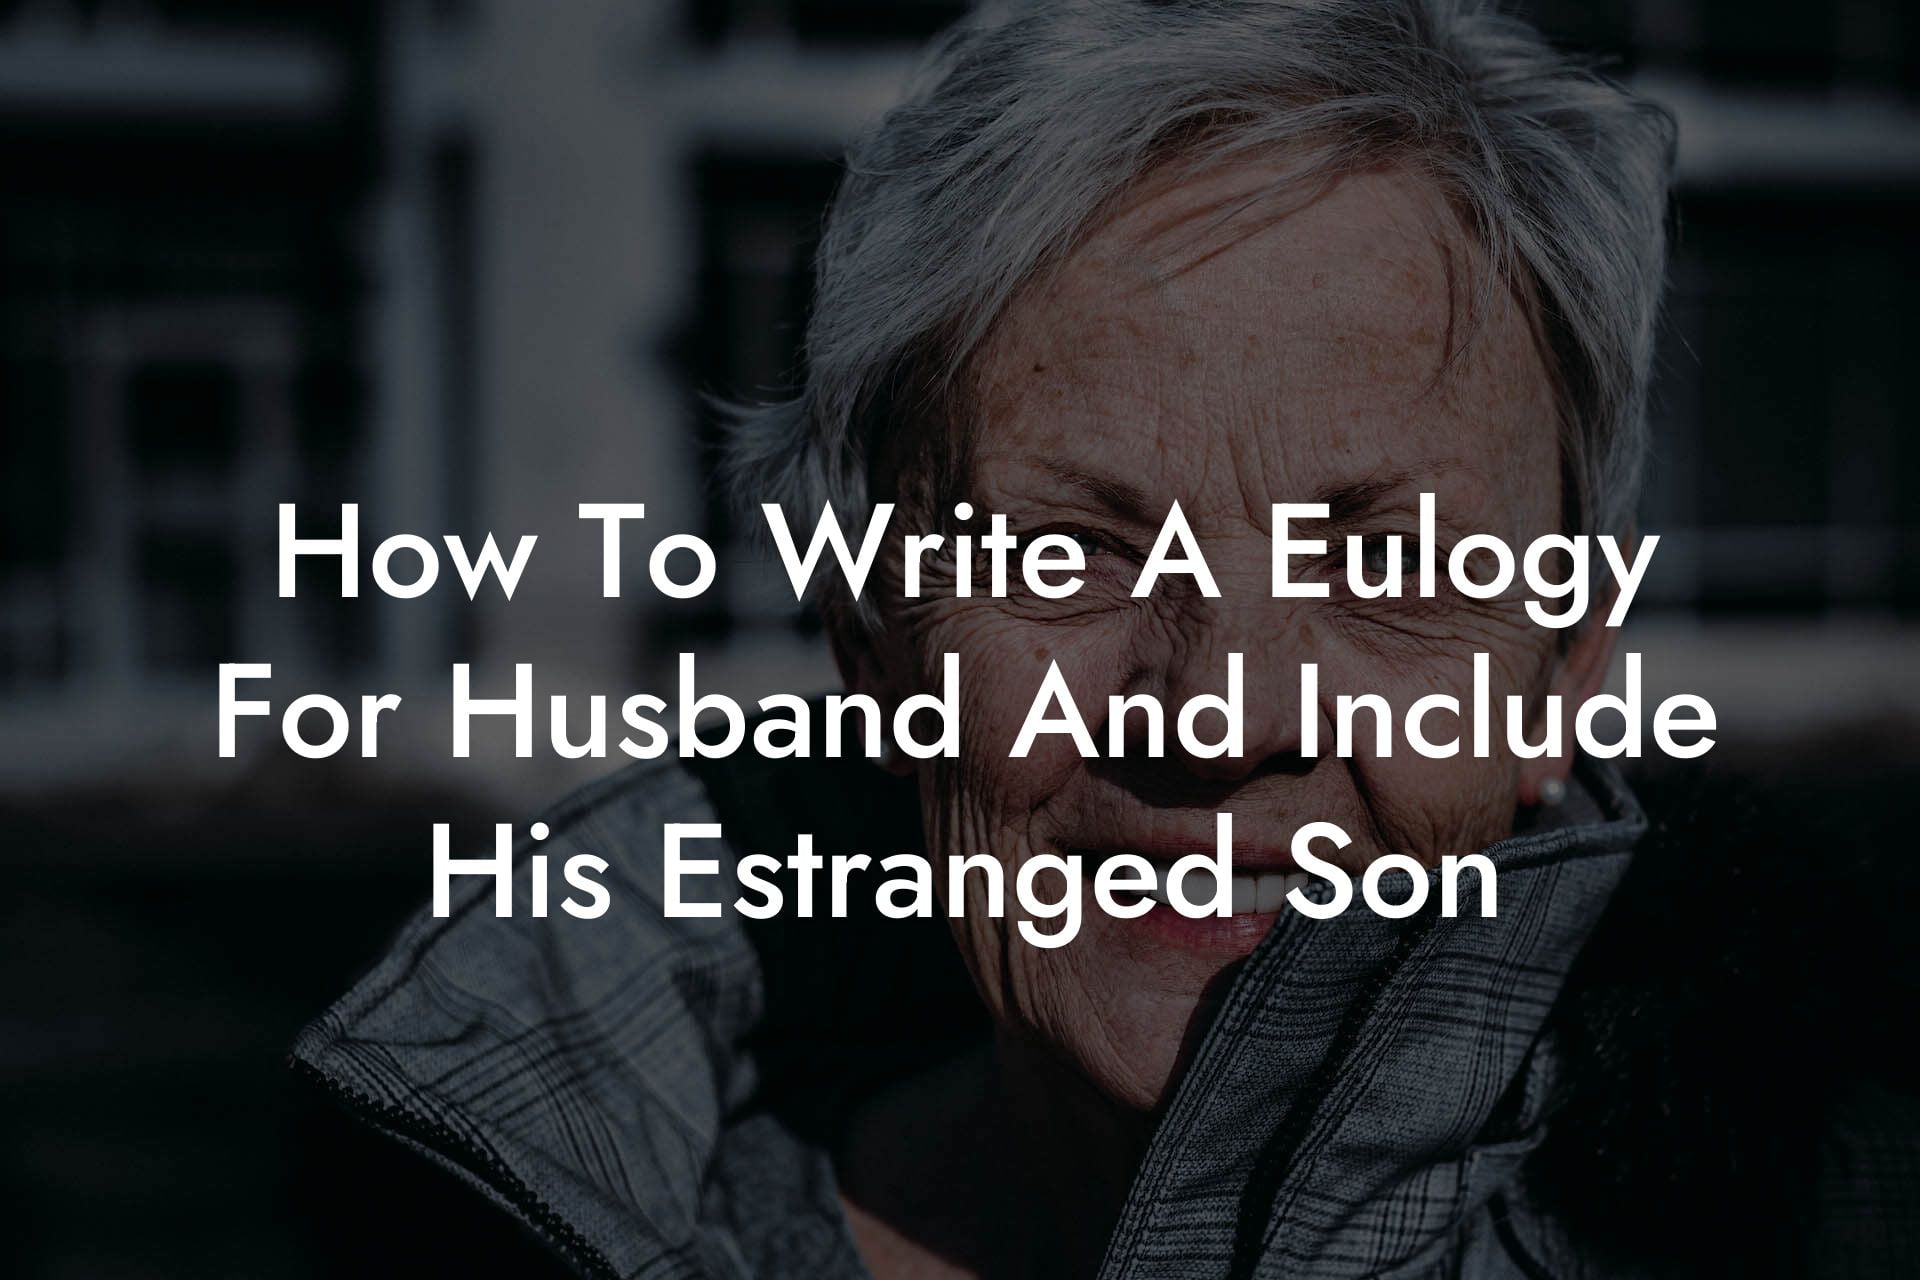 How To Write A Eulogy For Husband And Include His Estranged Son